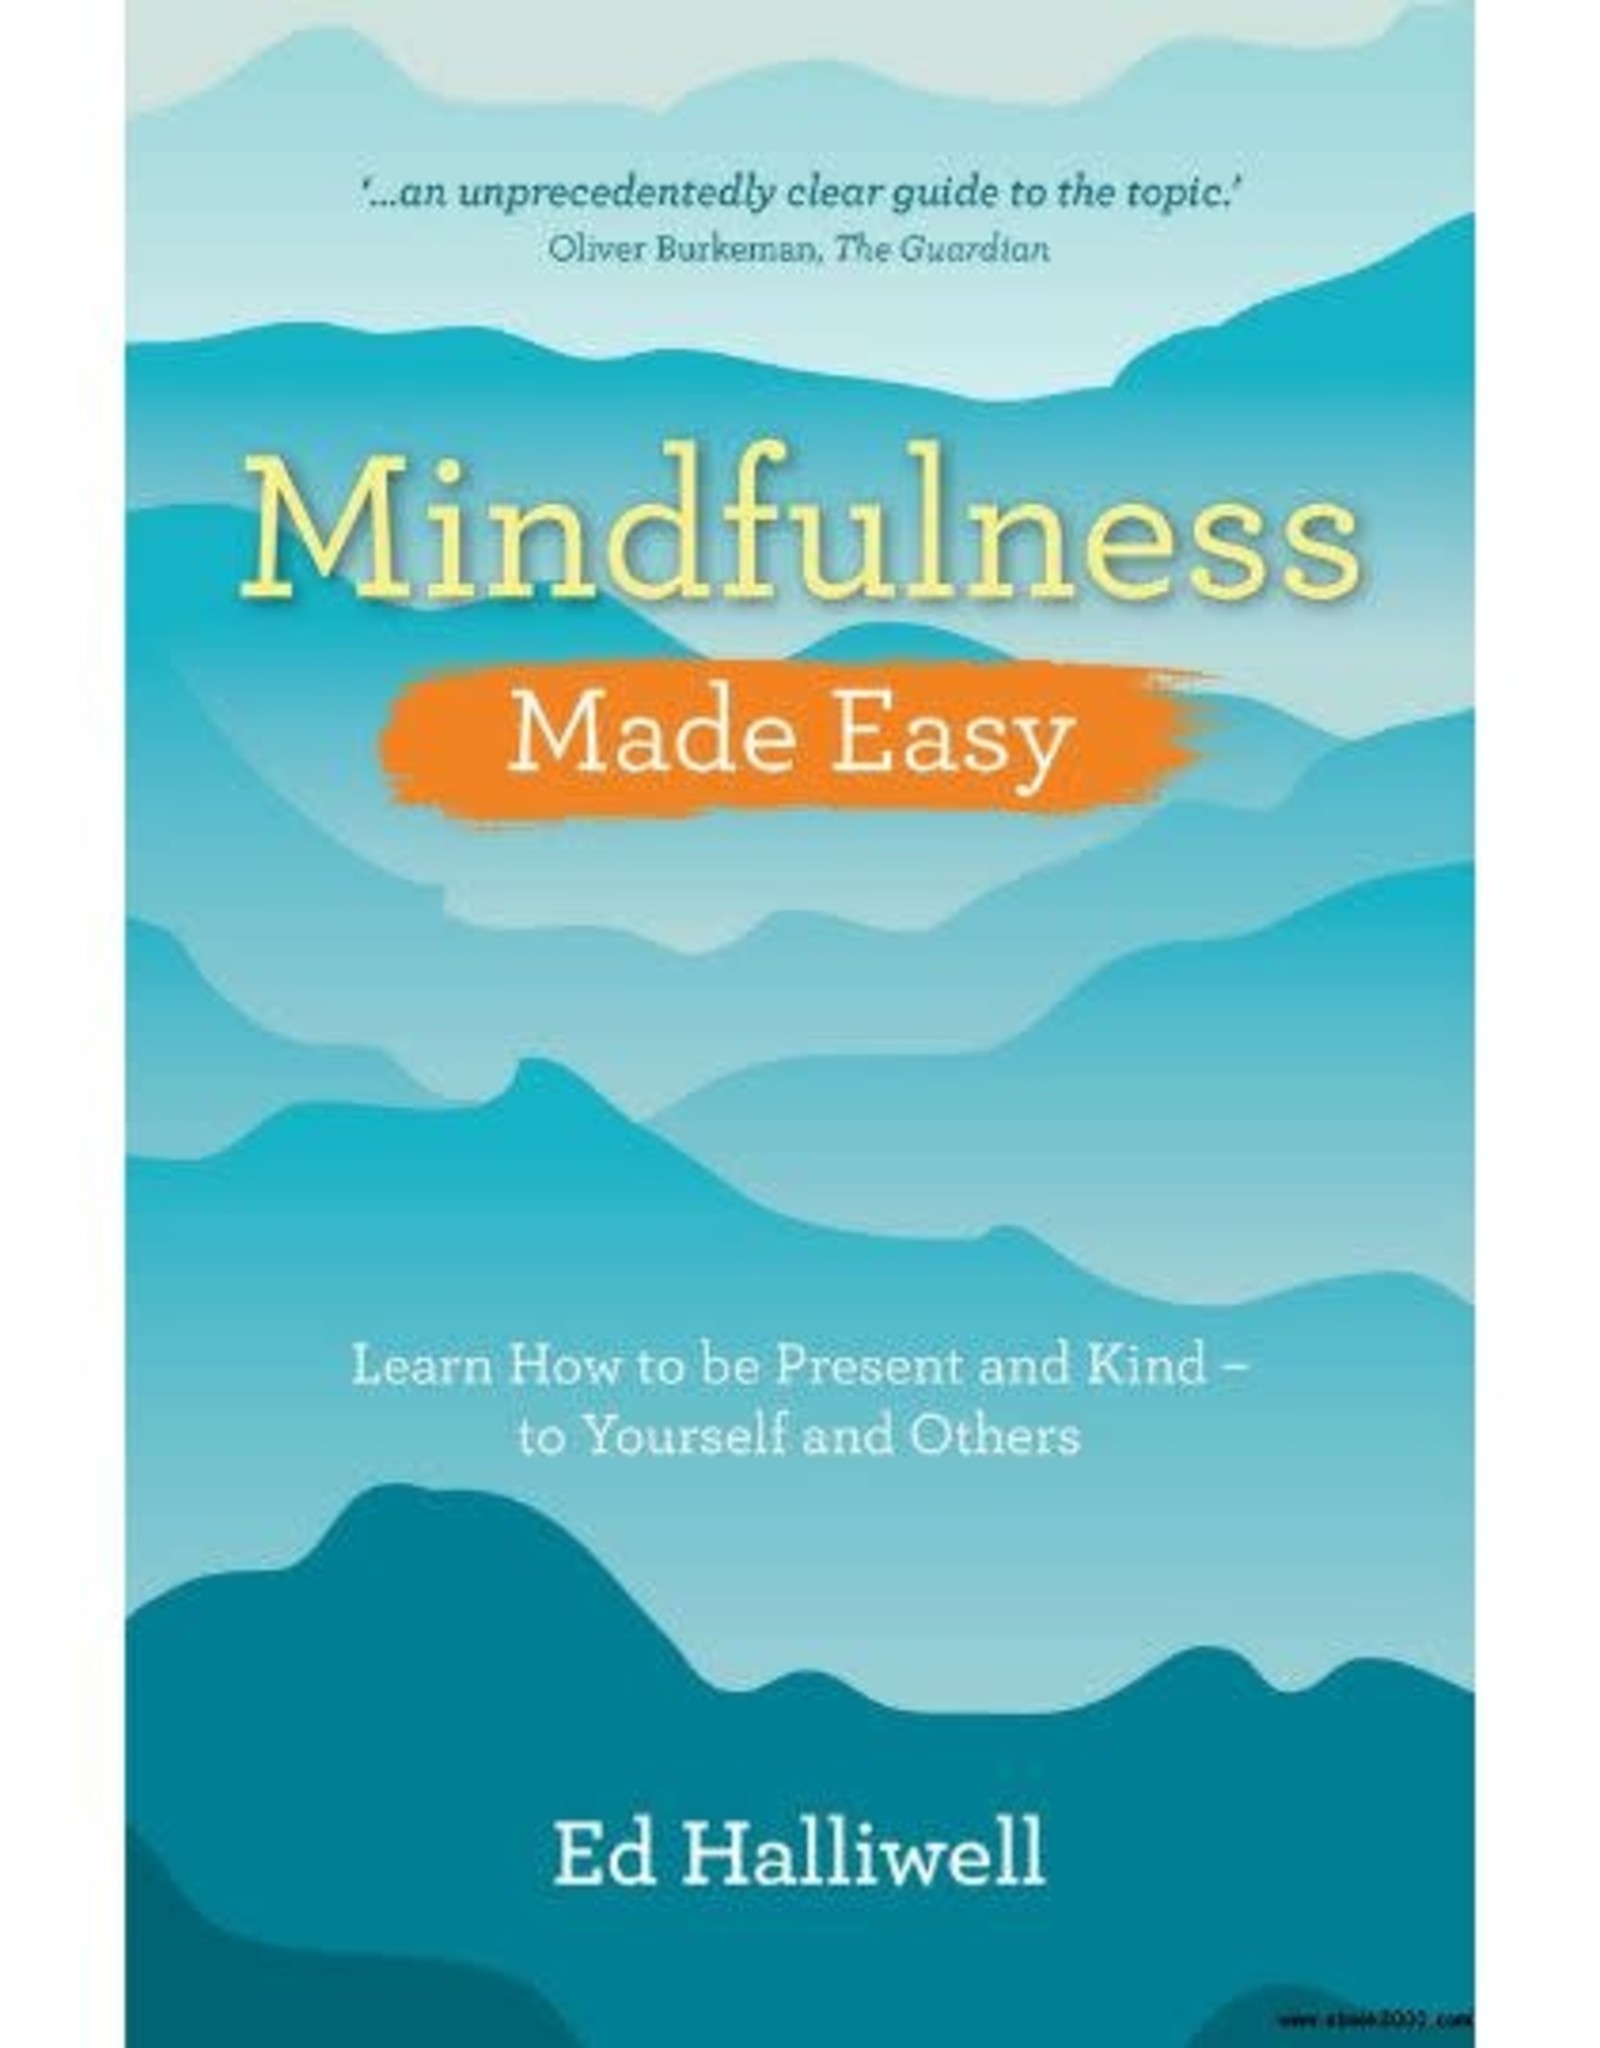 Mindfulness Made Easy by Ed Halliwell